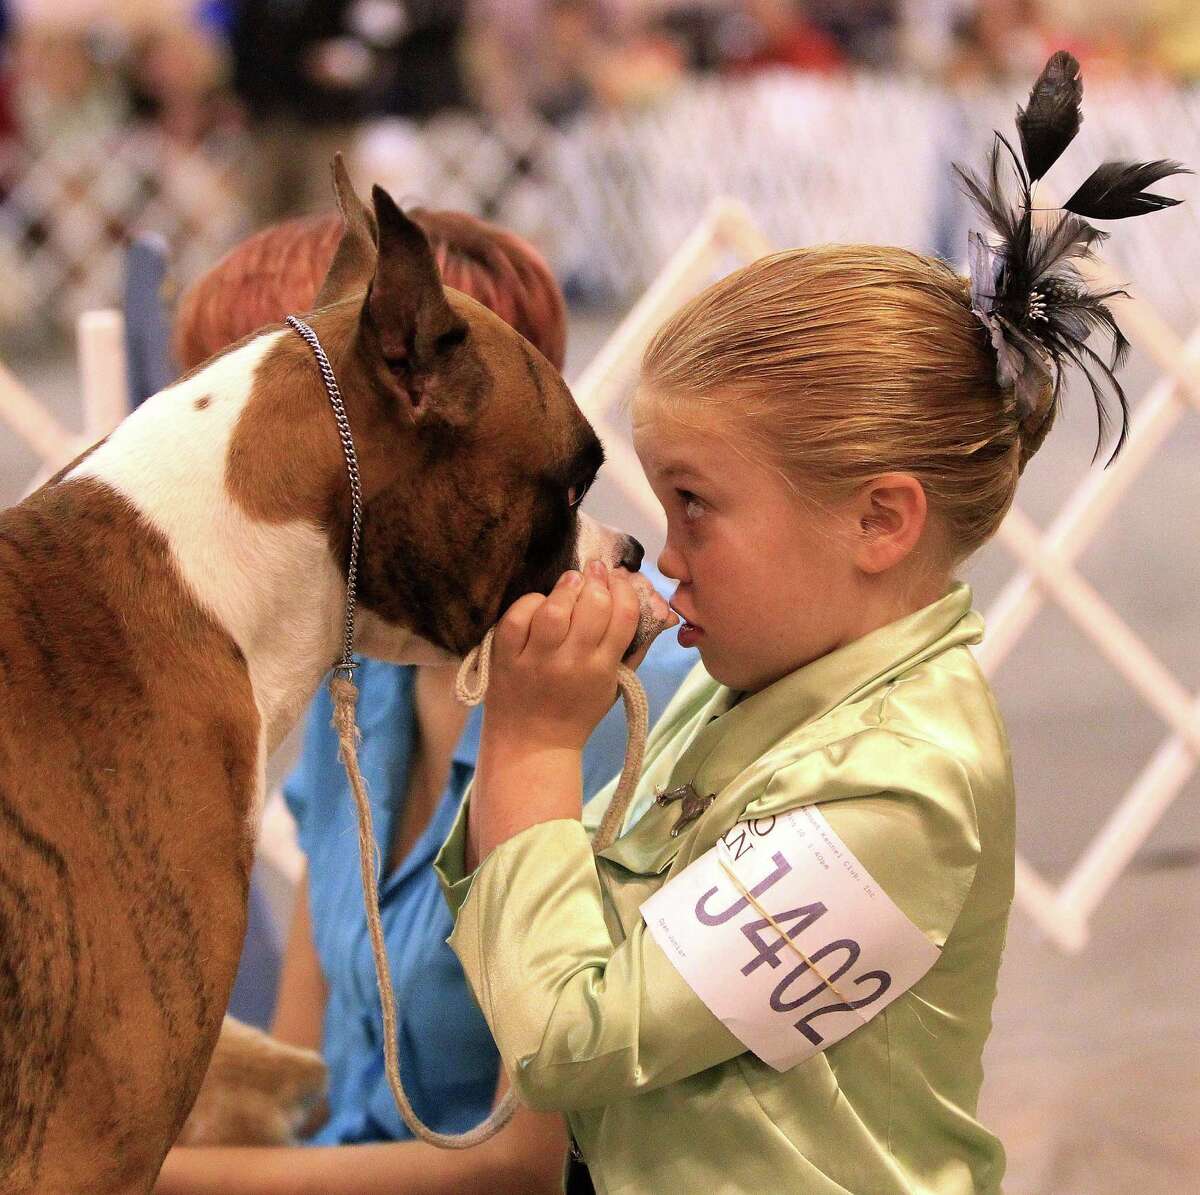 The Houston World Series Dog Shows opens Wednesday